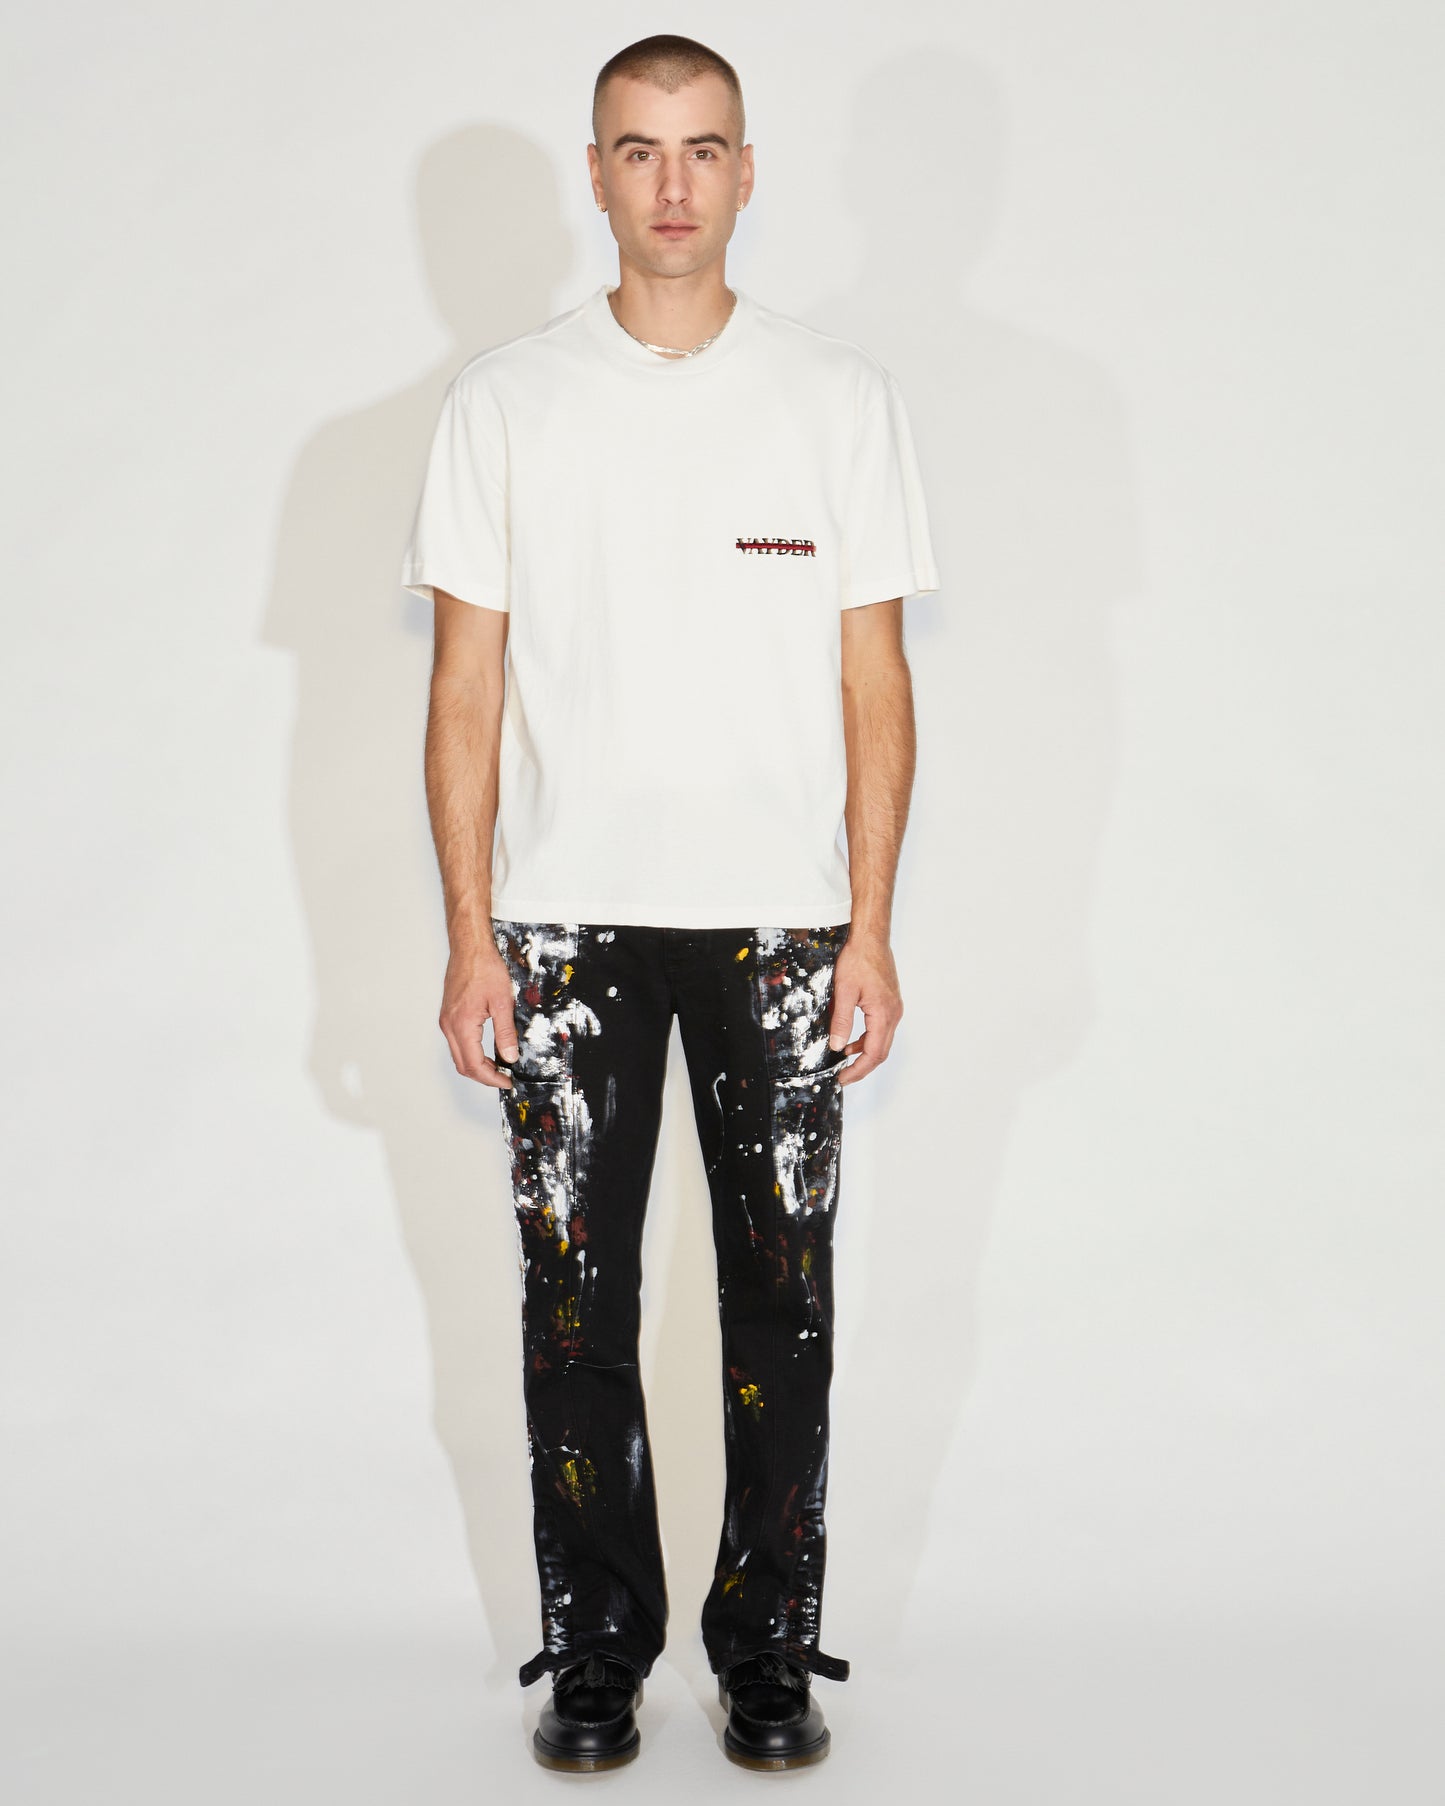 Man standing wearing black pants with paint splatter and a white tee and black shoes